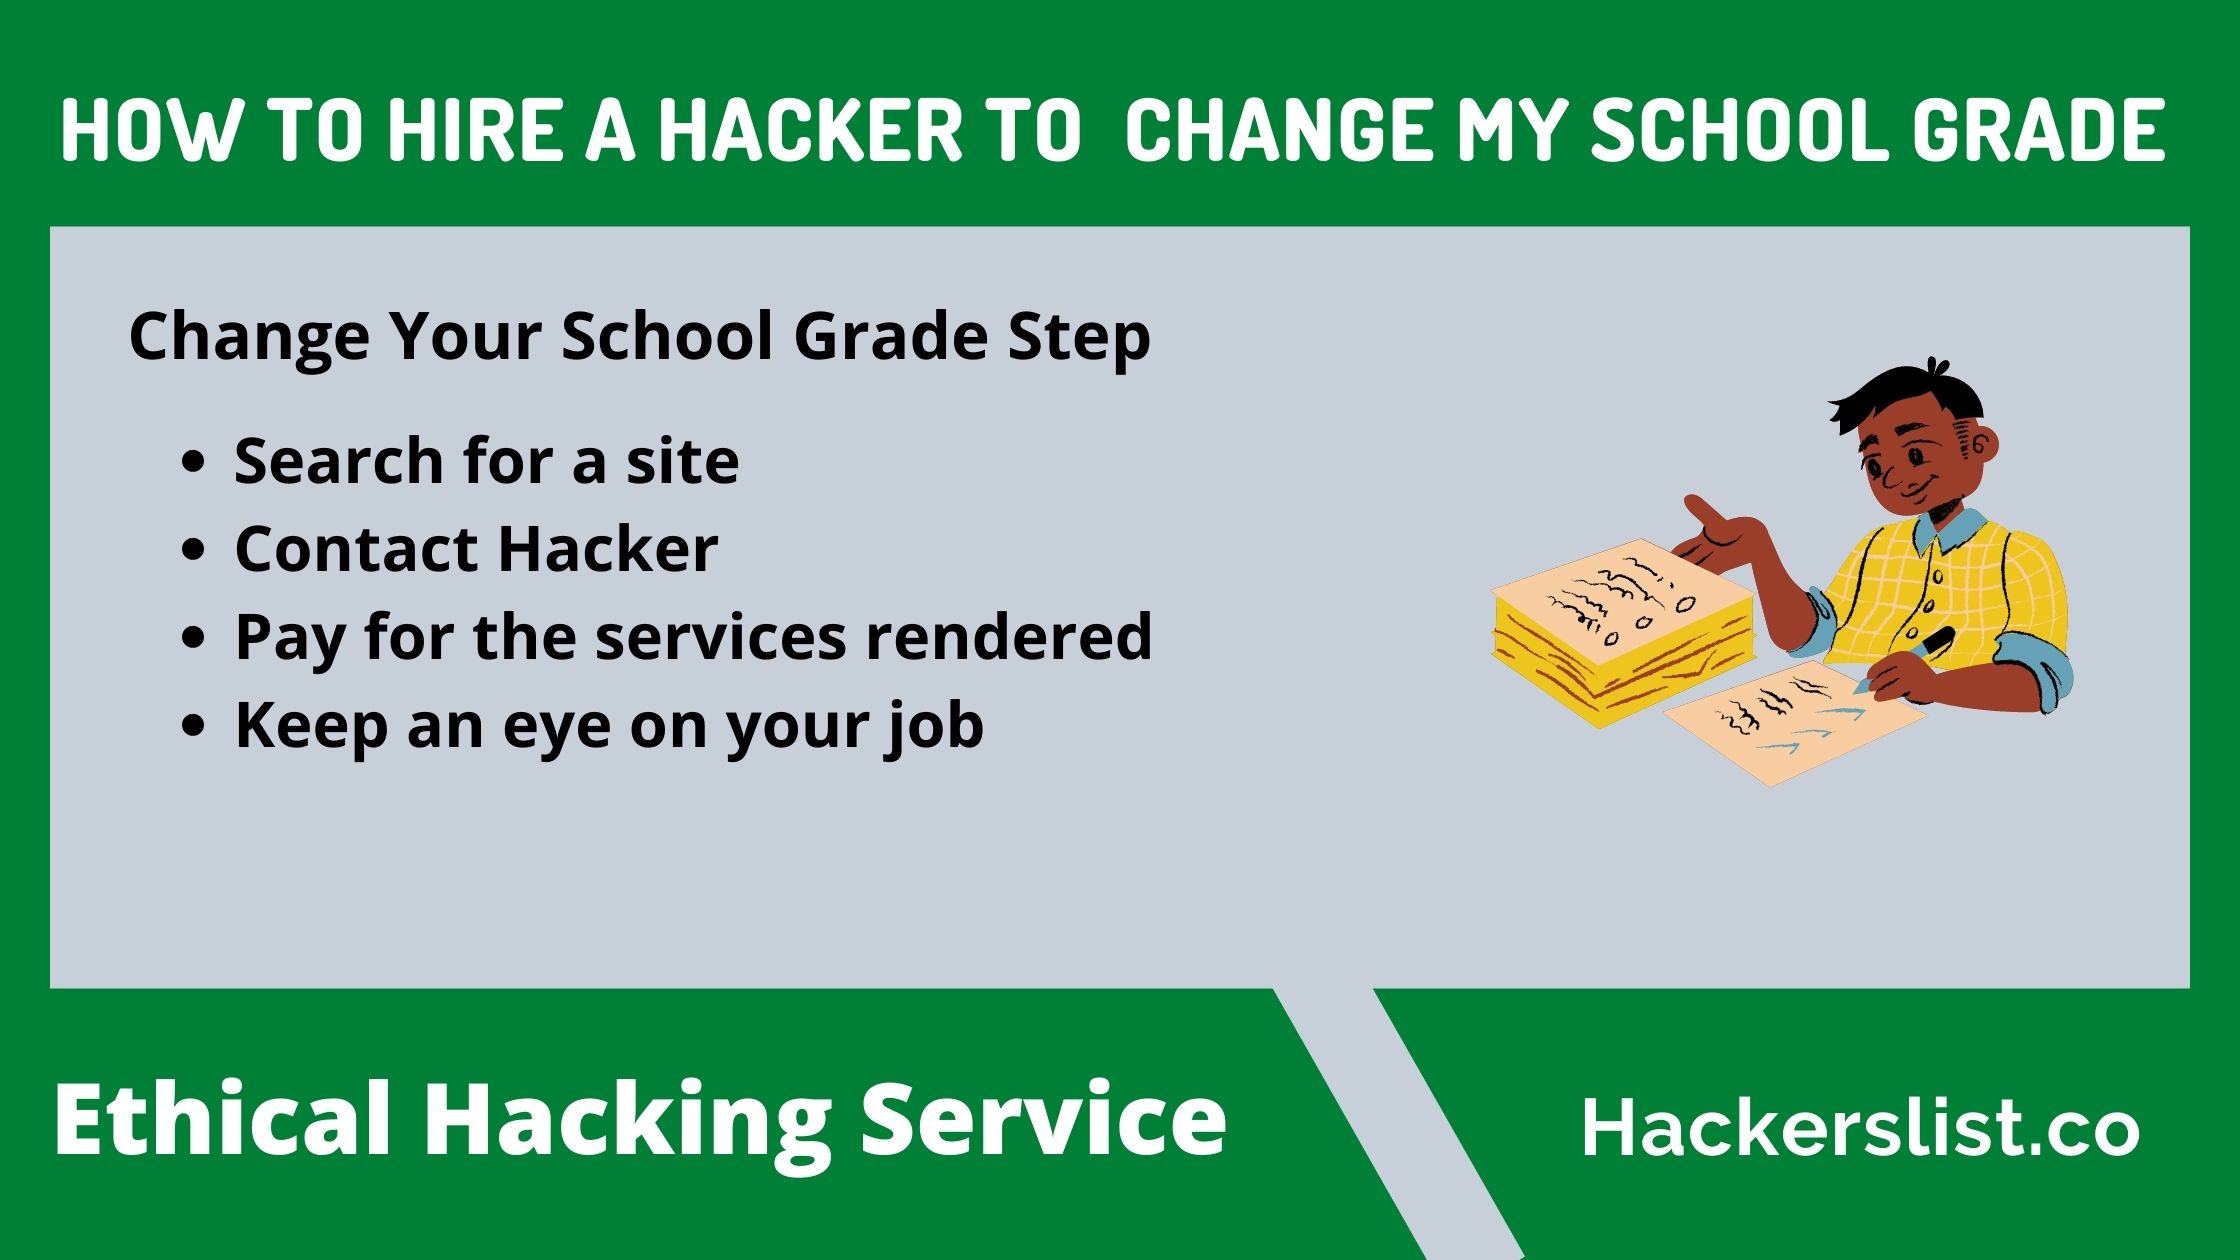 How to Hire a Hacker to Change My School Grade